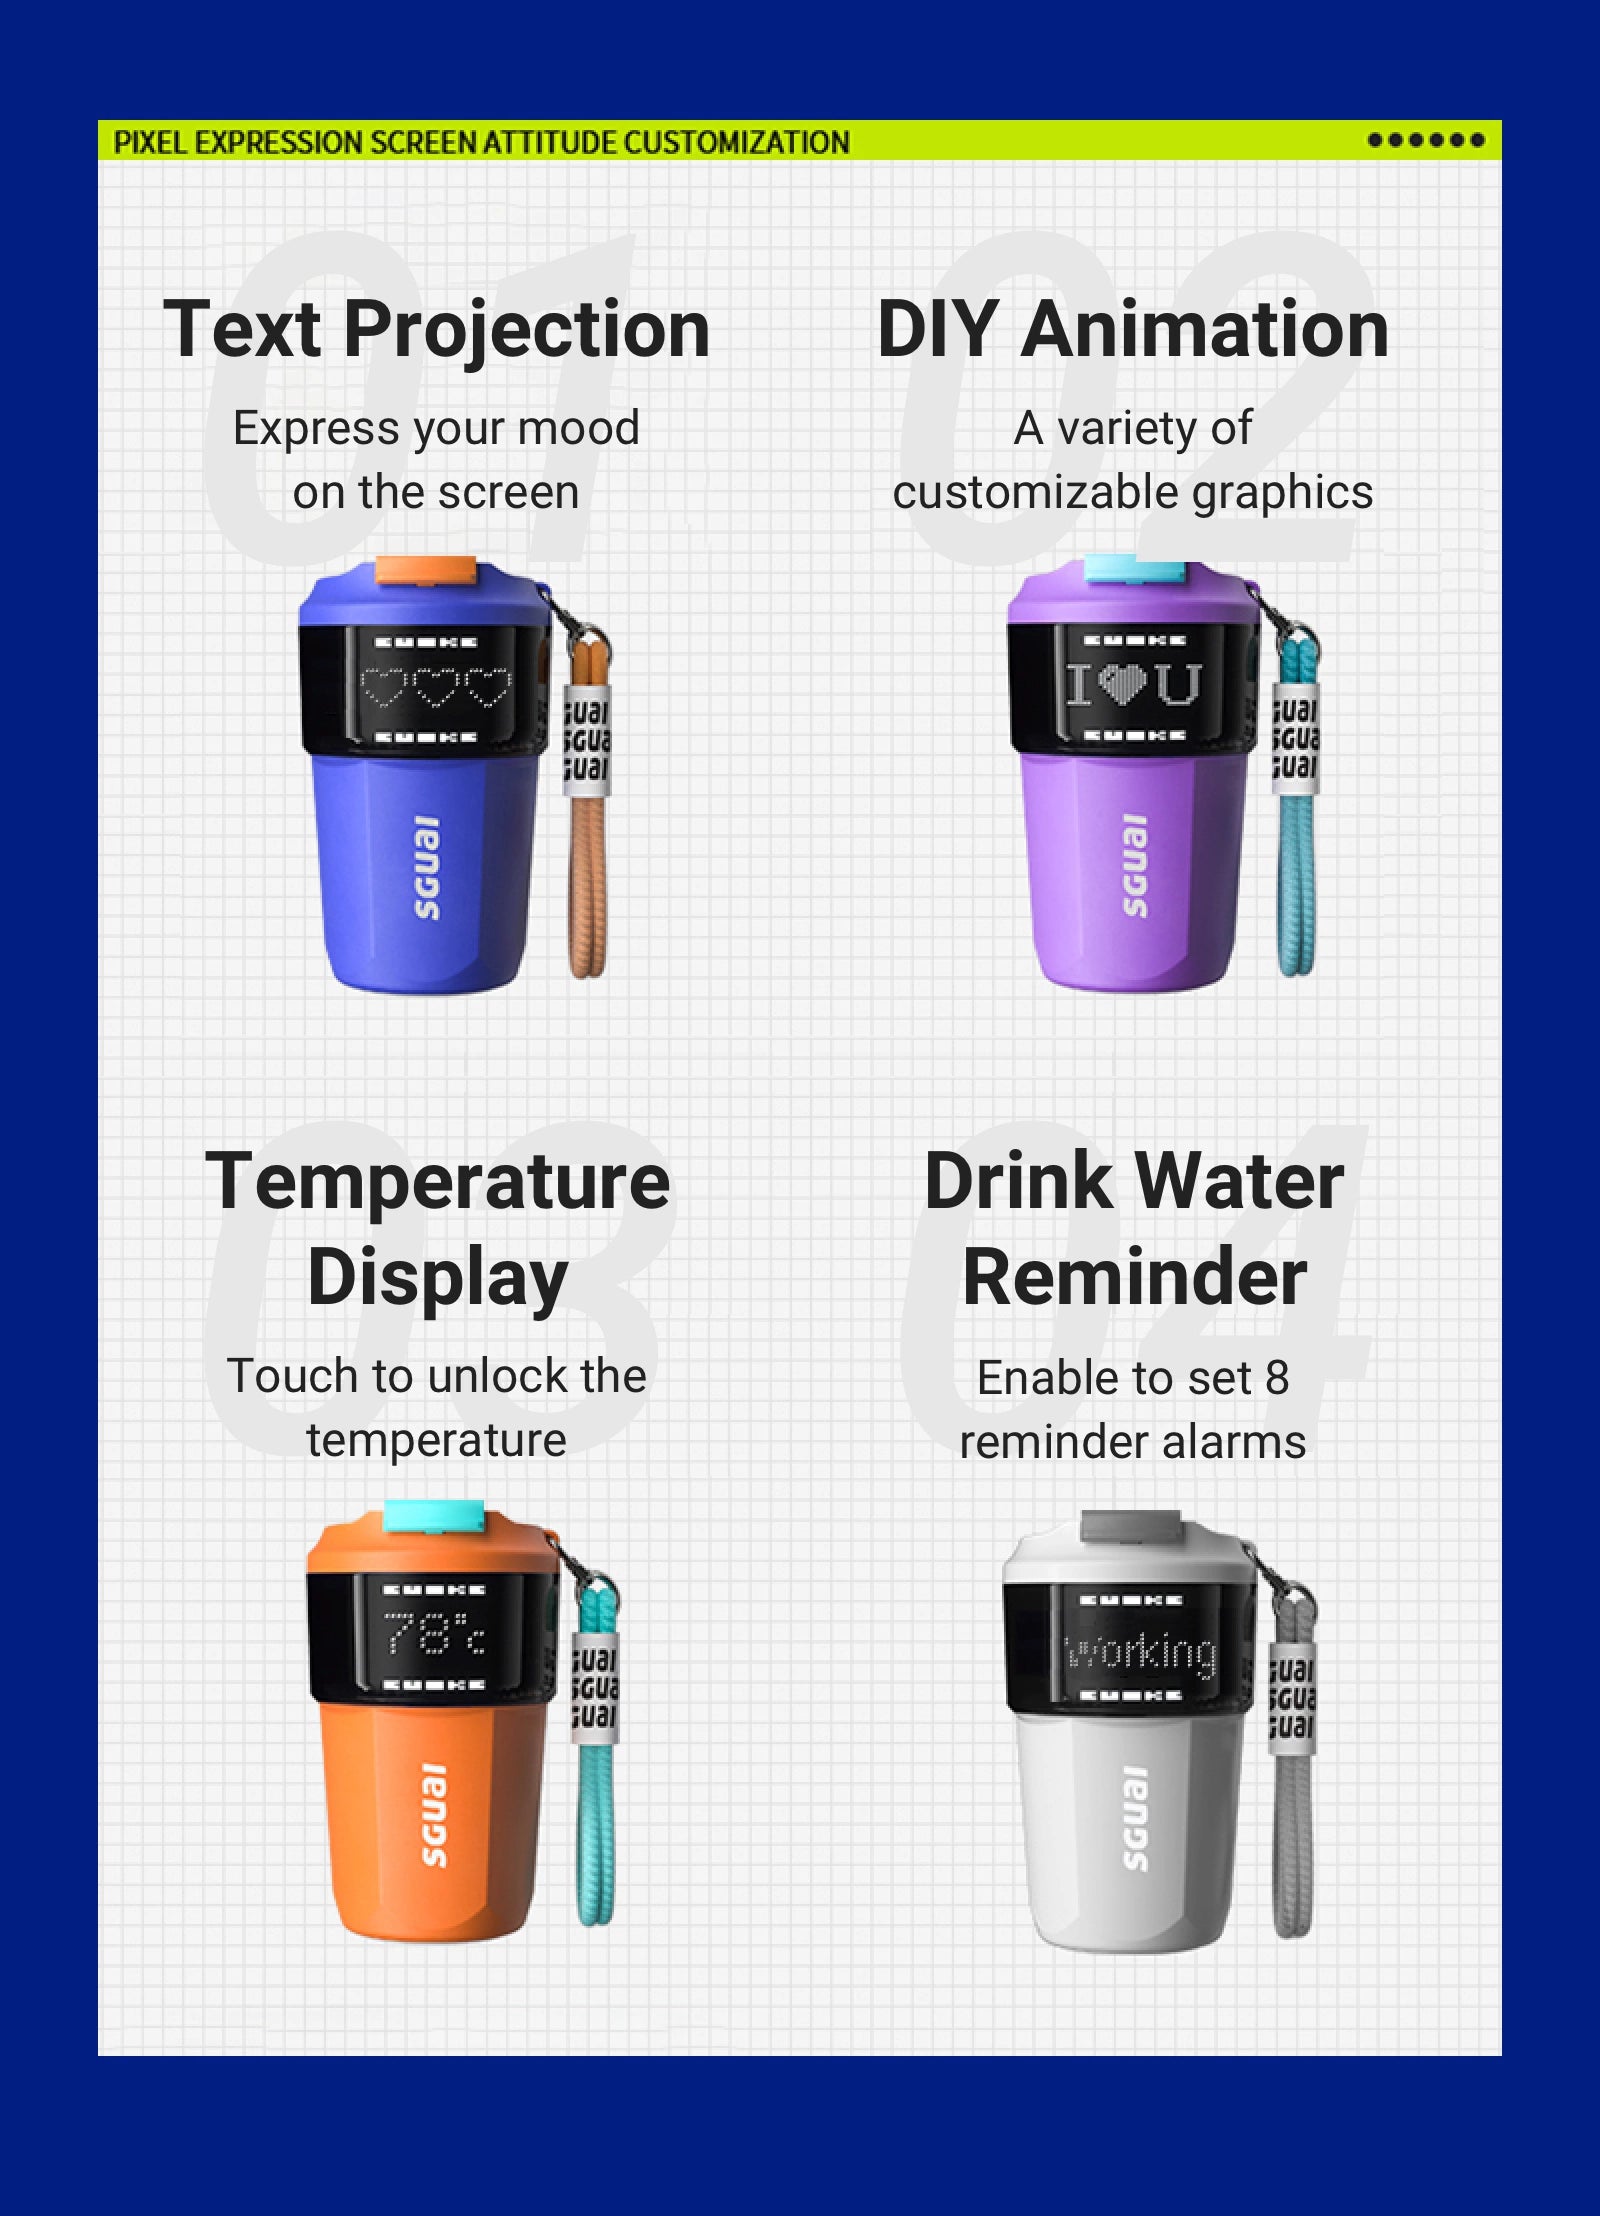 - Text Projection    - Express your mood on the screen - DIY Animation 动画DIY   - A variety of  customizable graphics - Temperature Display    - Touch to unlock the temperature  - Drink Water Reminder   - Enable to set 8 reminder alarms